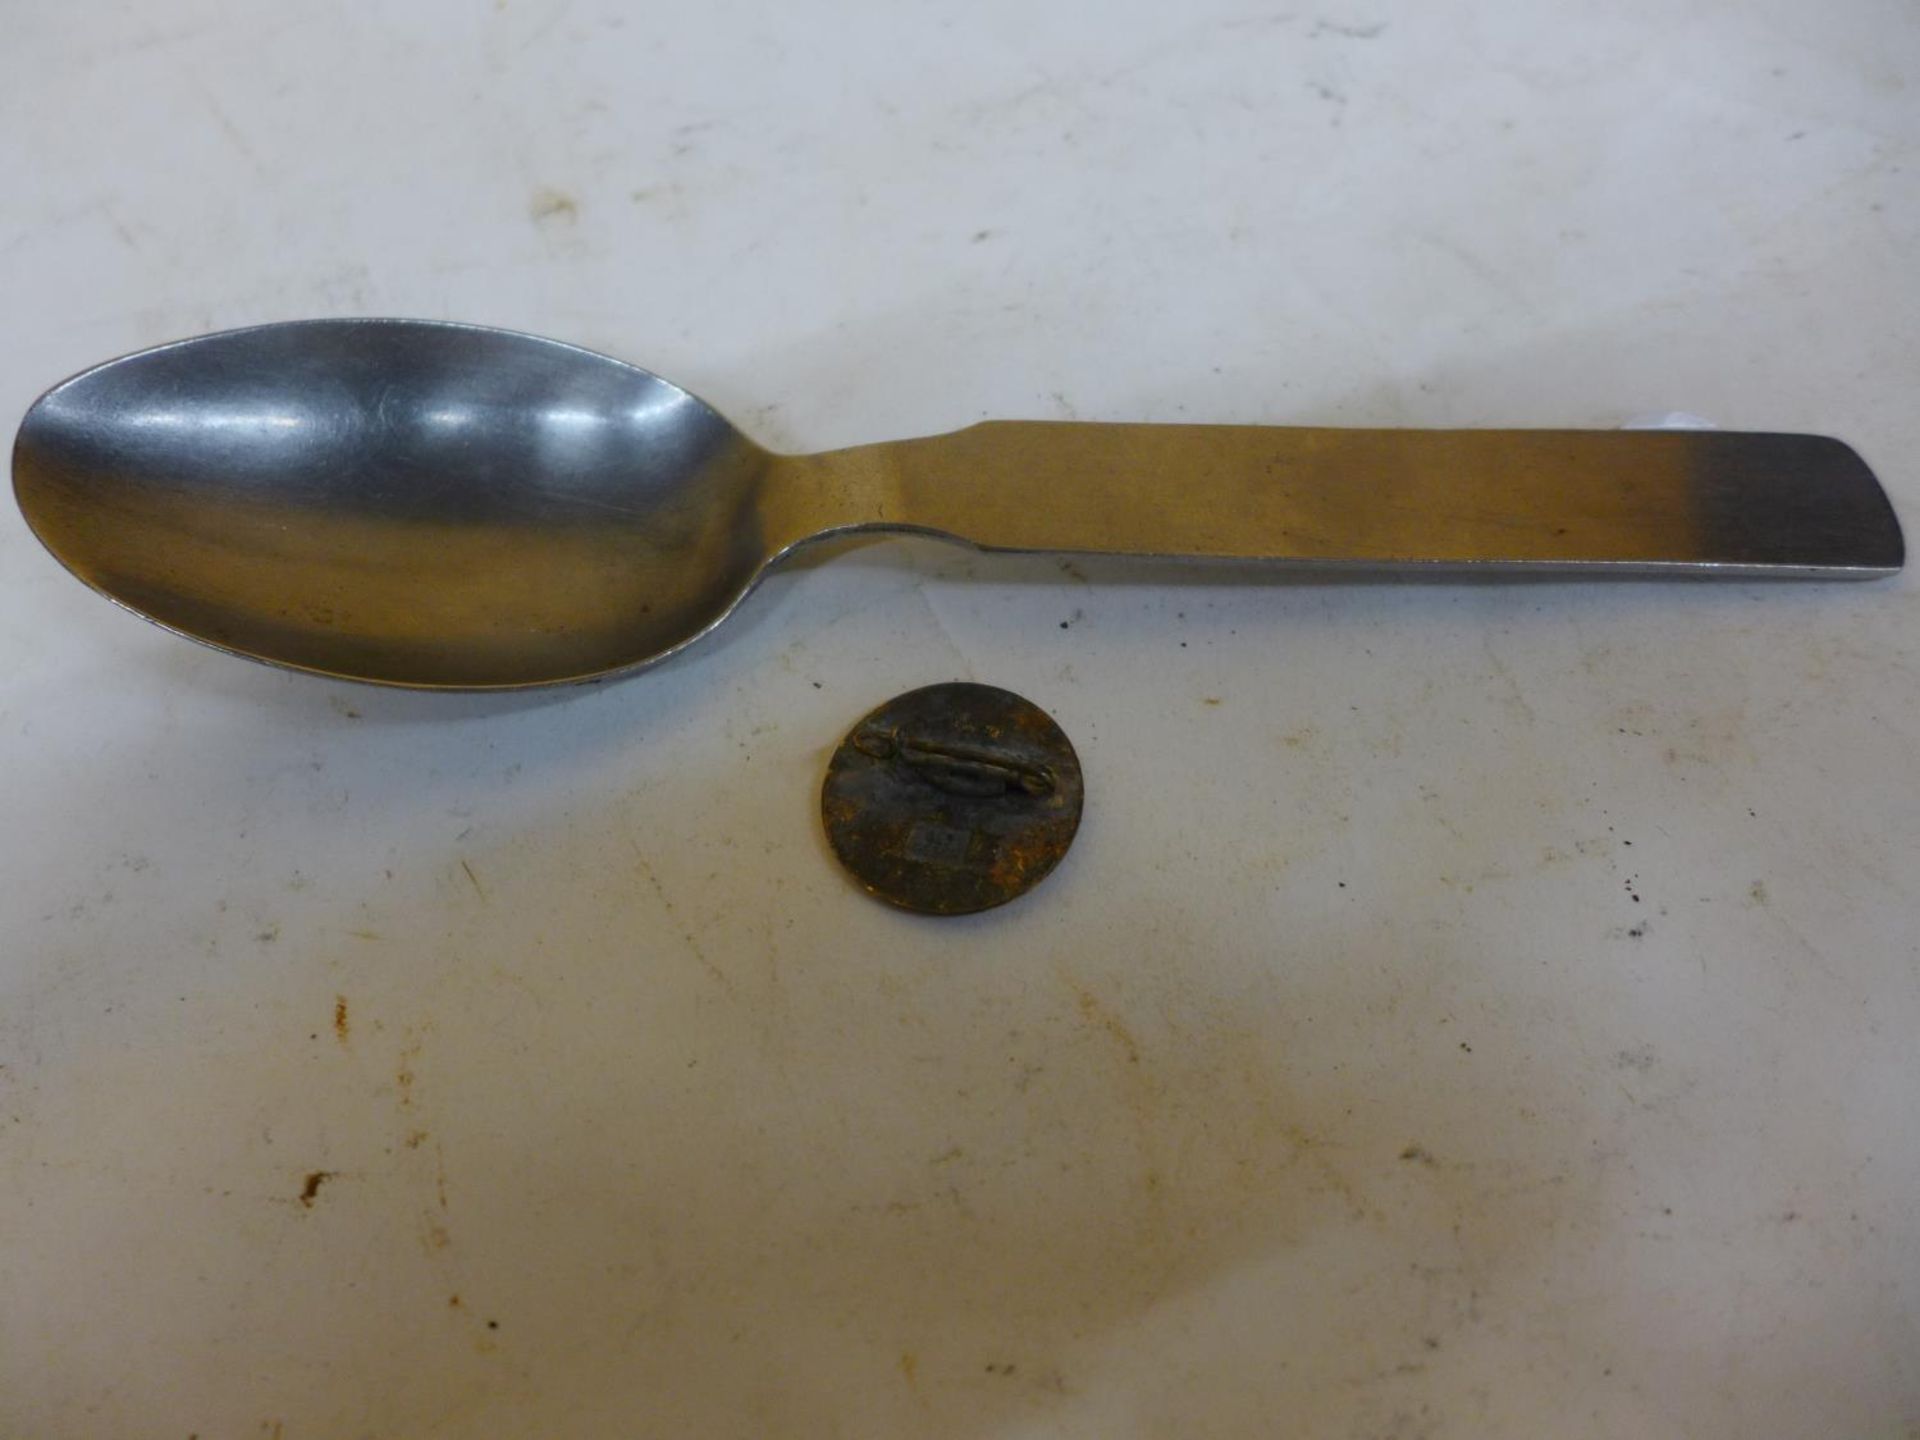 A NAZI GERMANY SPOON WITH EAGLE AND SWASTIKA DECORATION AND A NAZE 1936 BERLIN OLYMPICS ENAMEL BADGE - Image 4 of 4